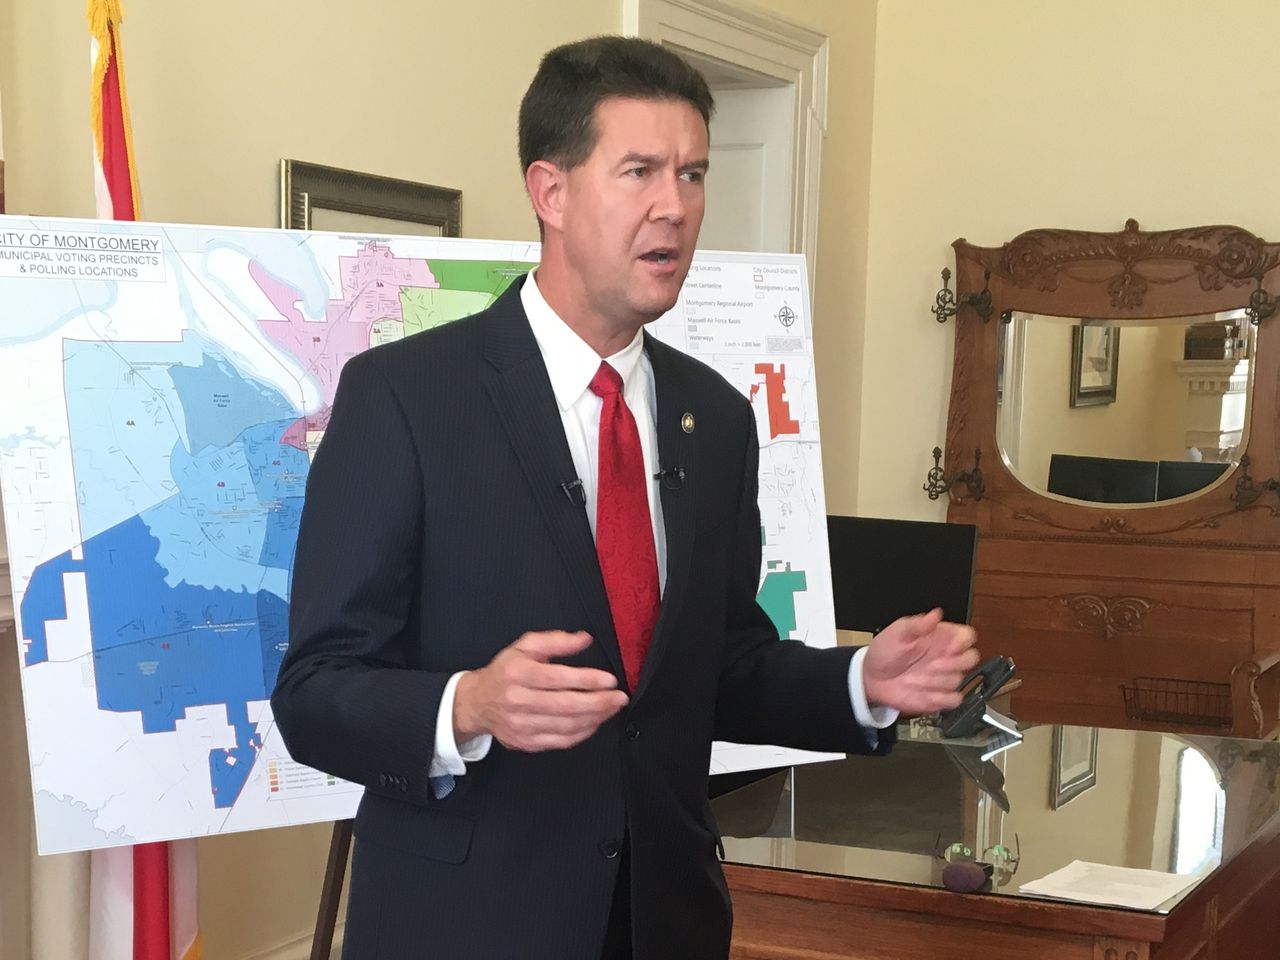 John Merrill will appeal judge’s ruling on disqualified voter lists